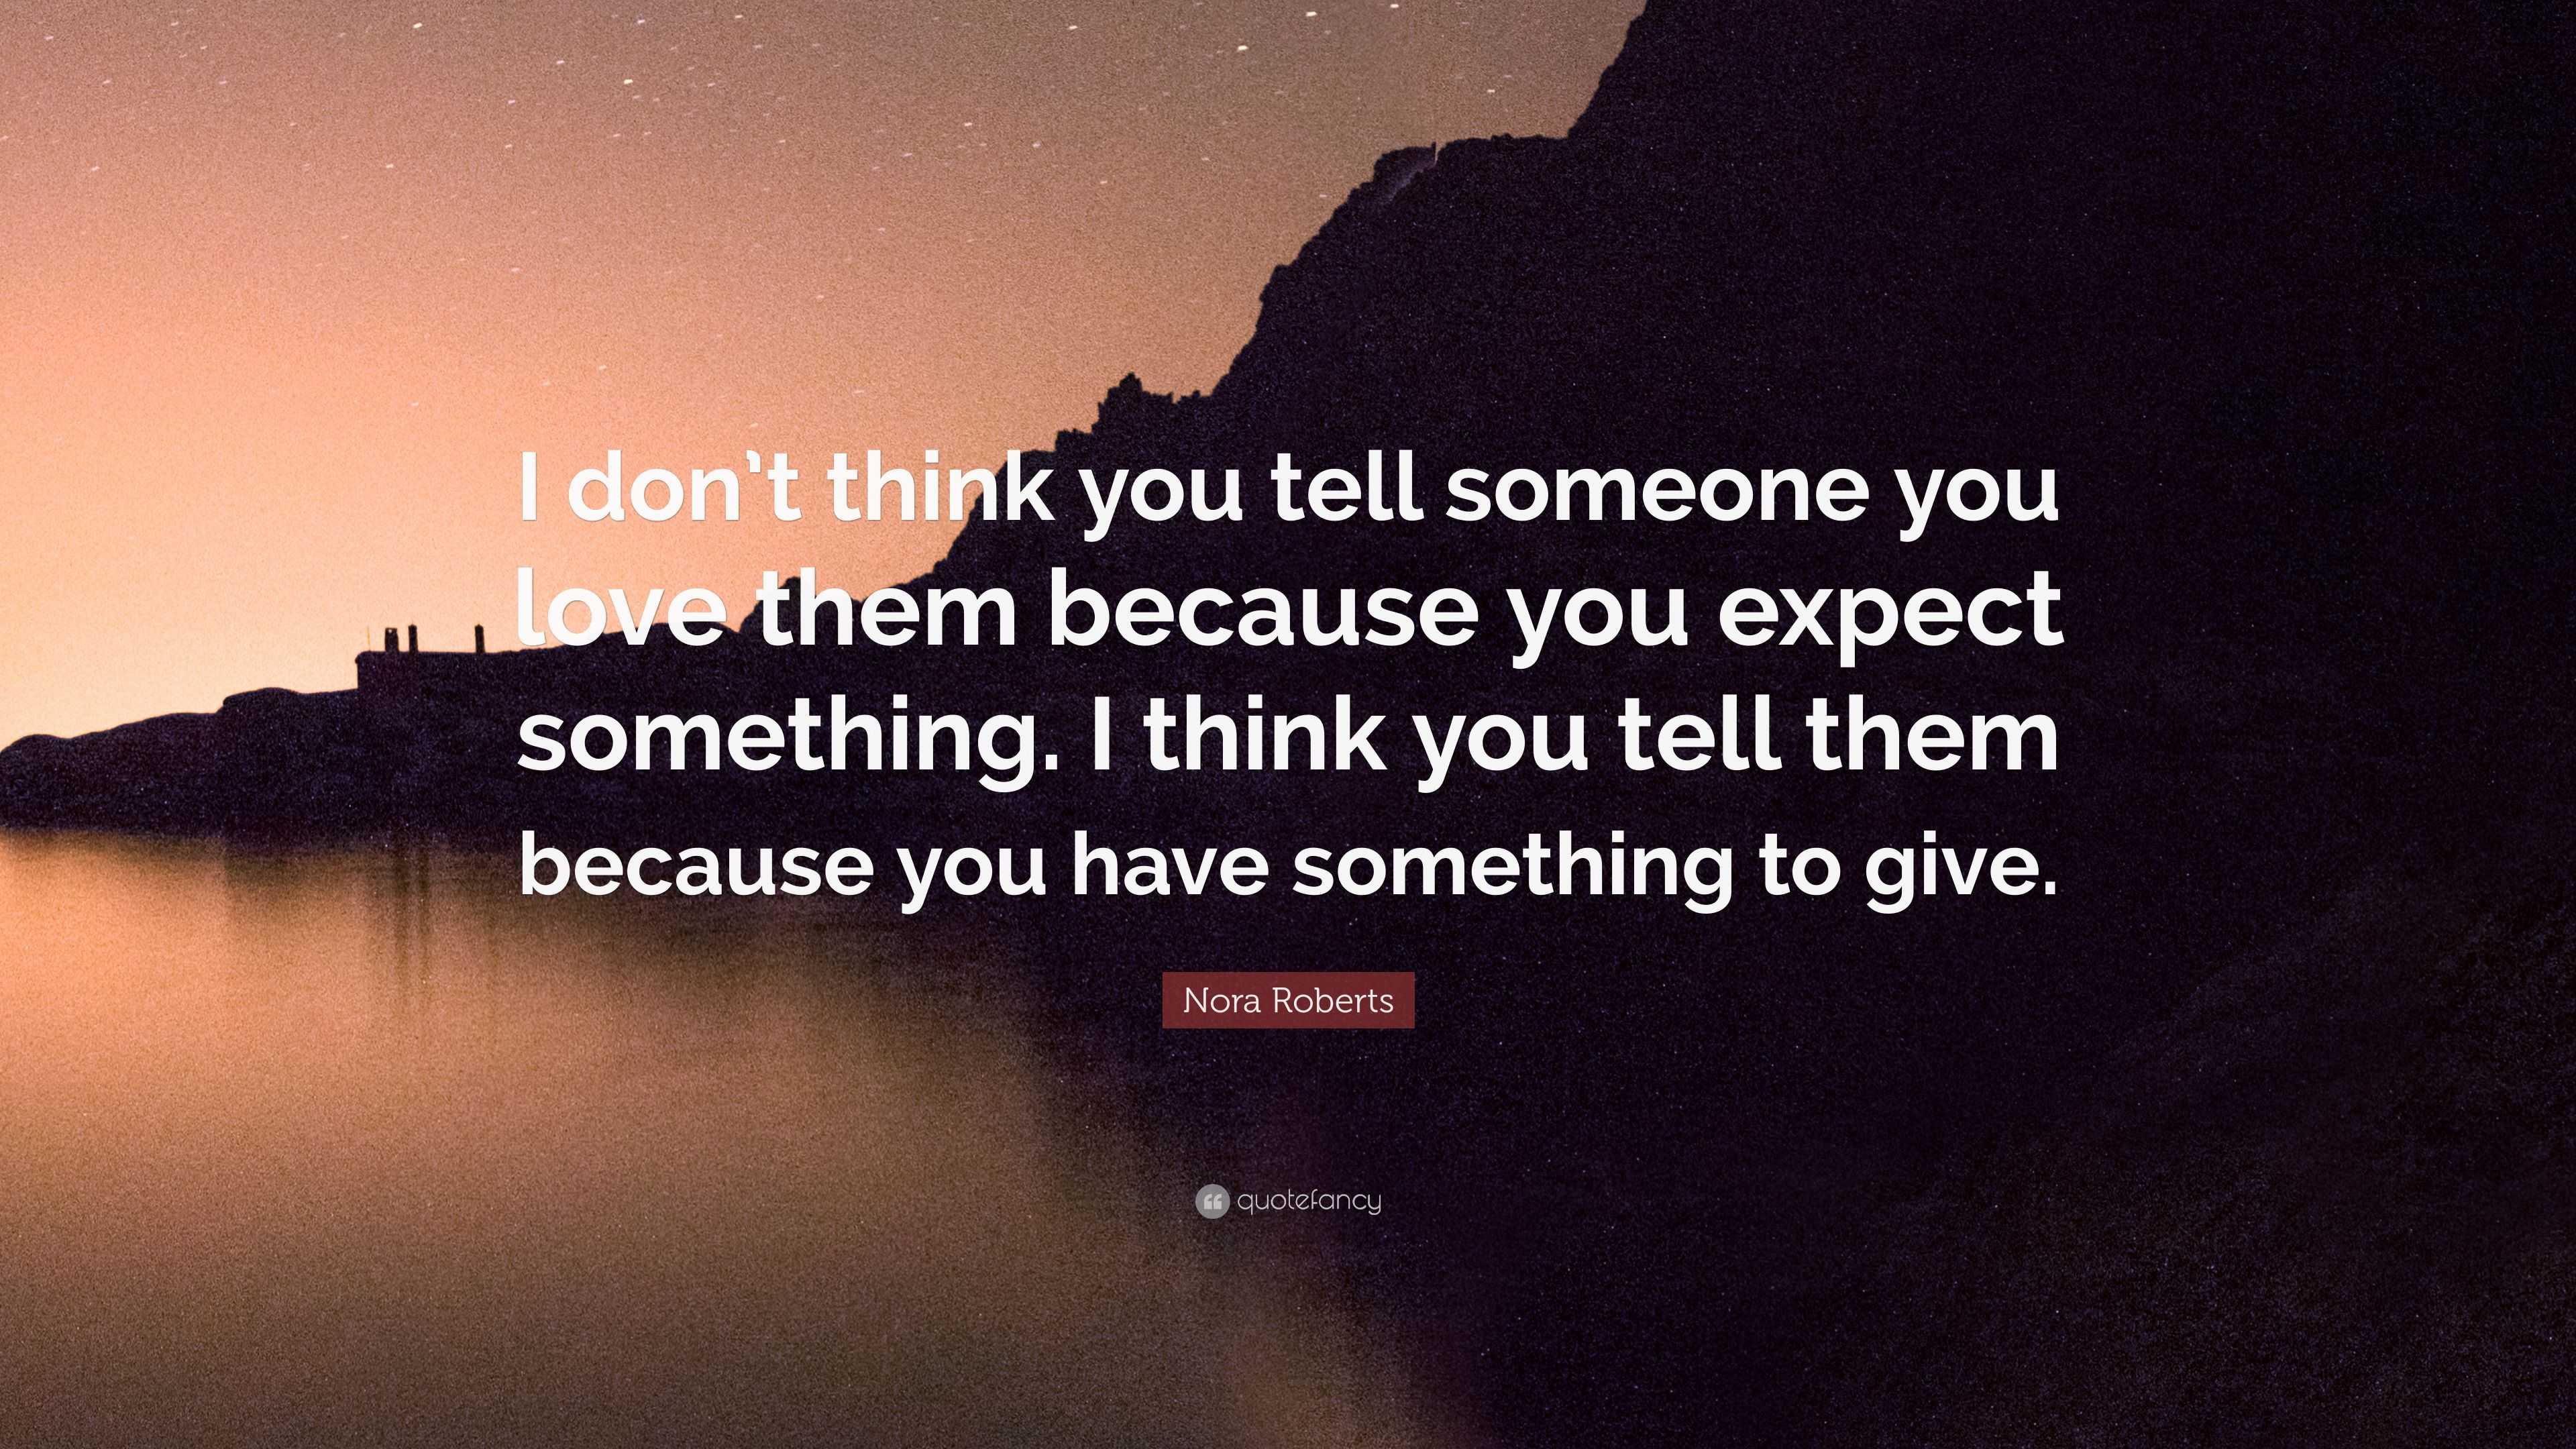 Nora Roberts Quote “I don t think you tell someone you love them